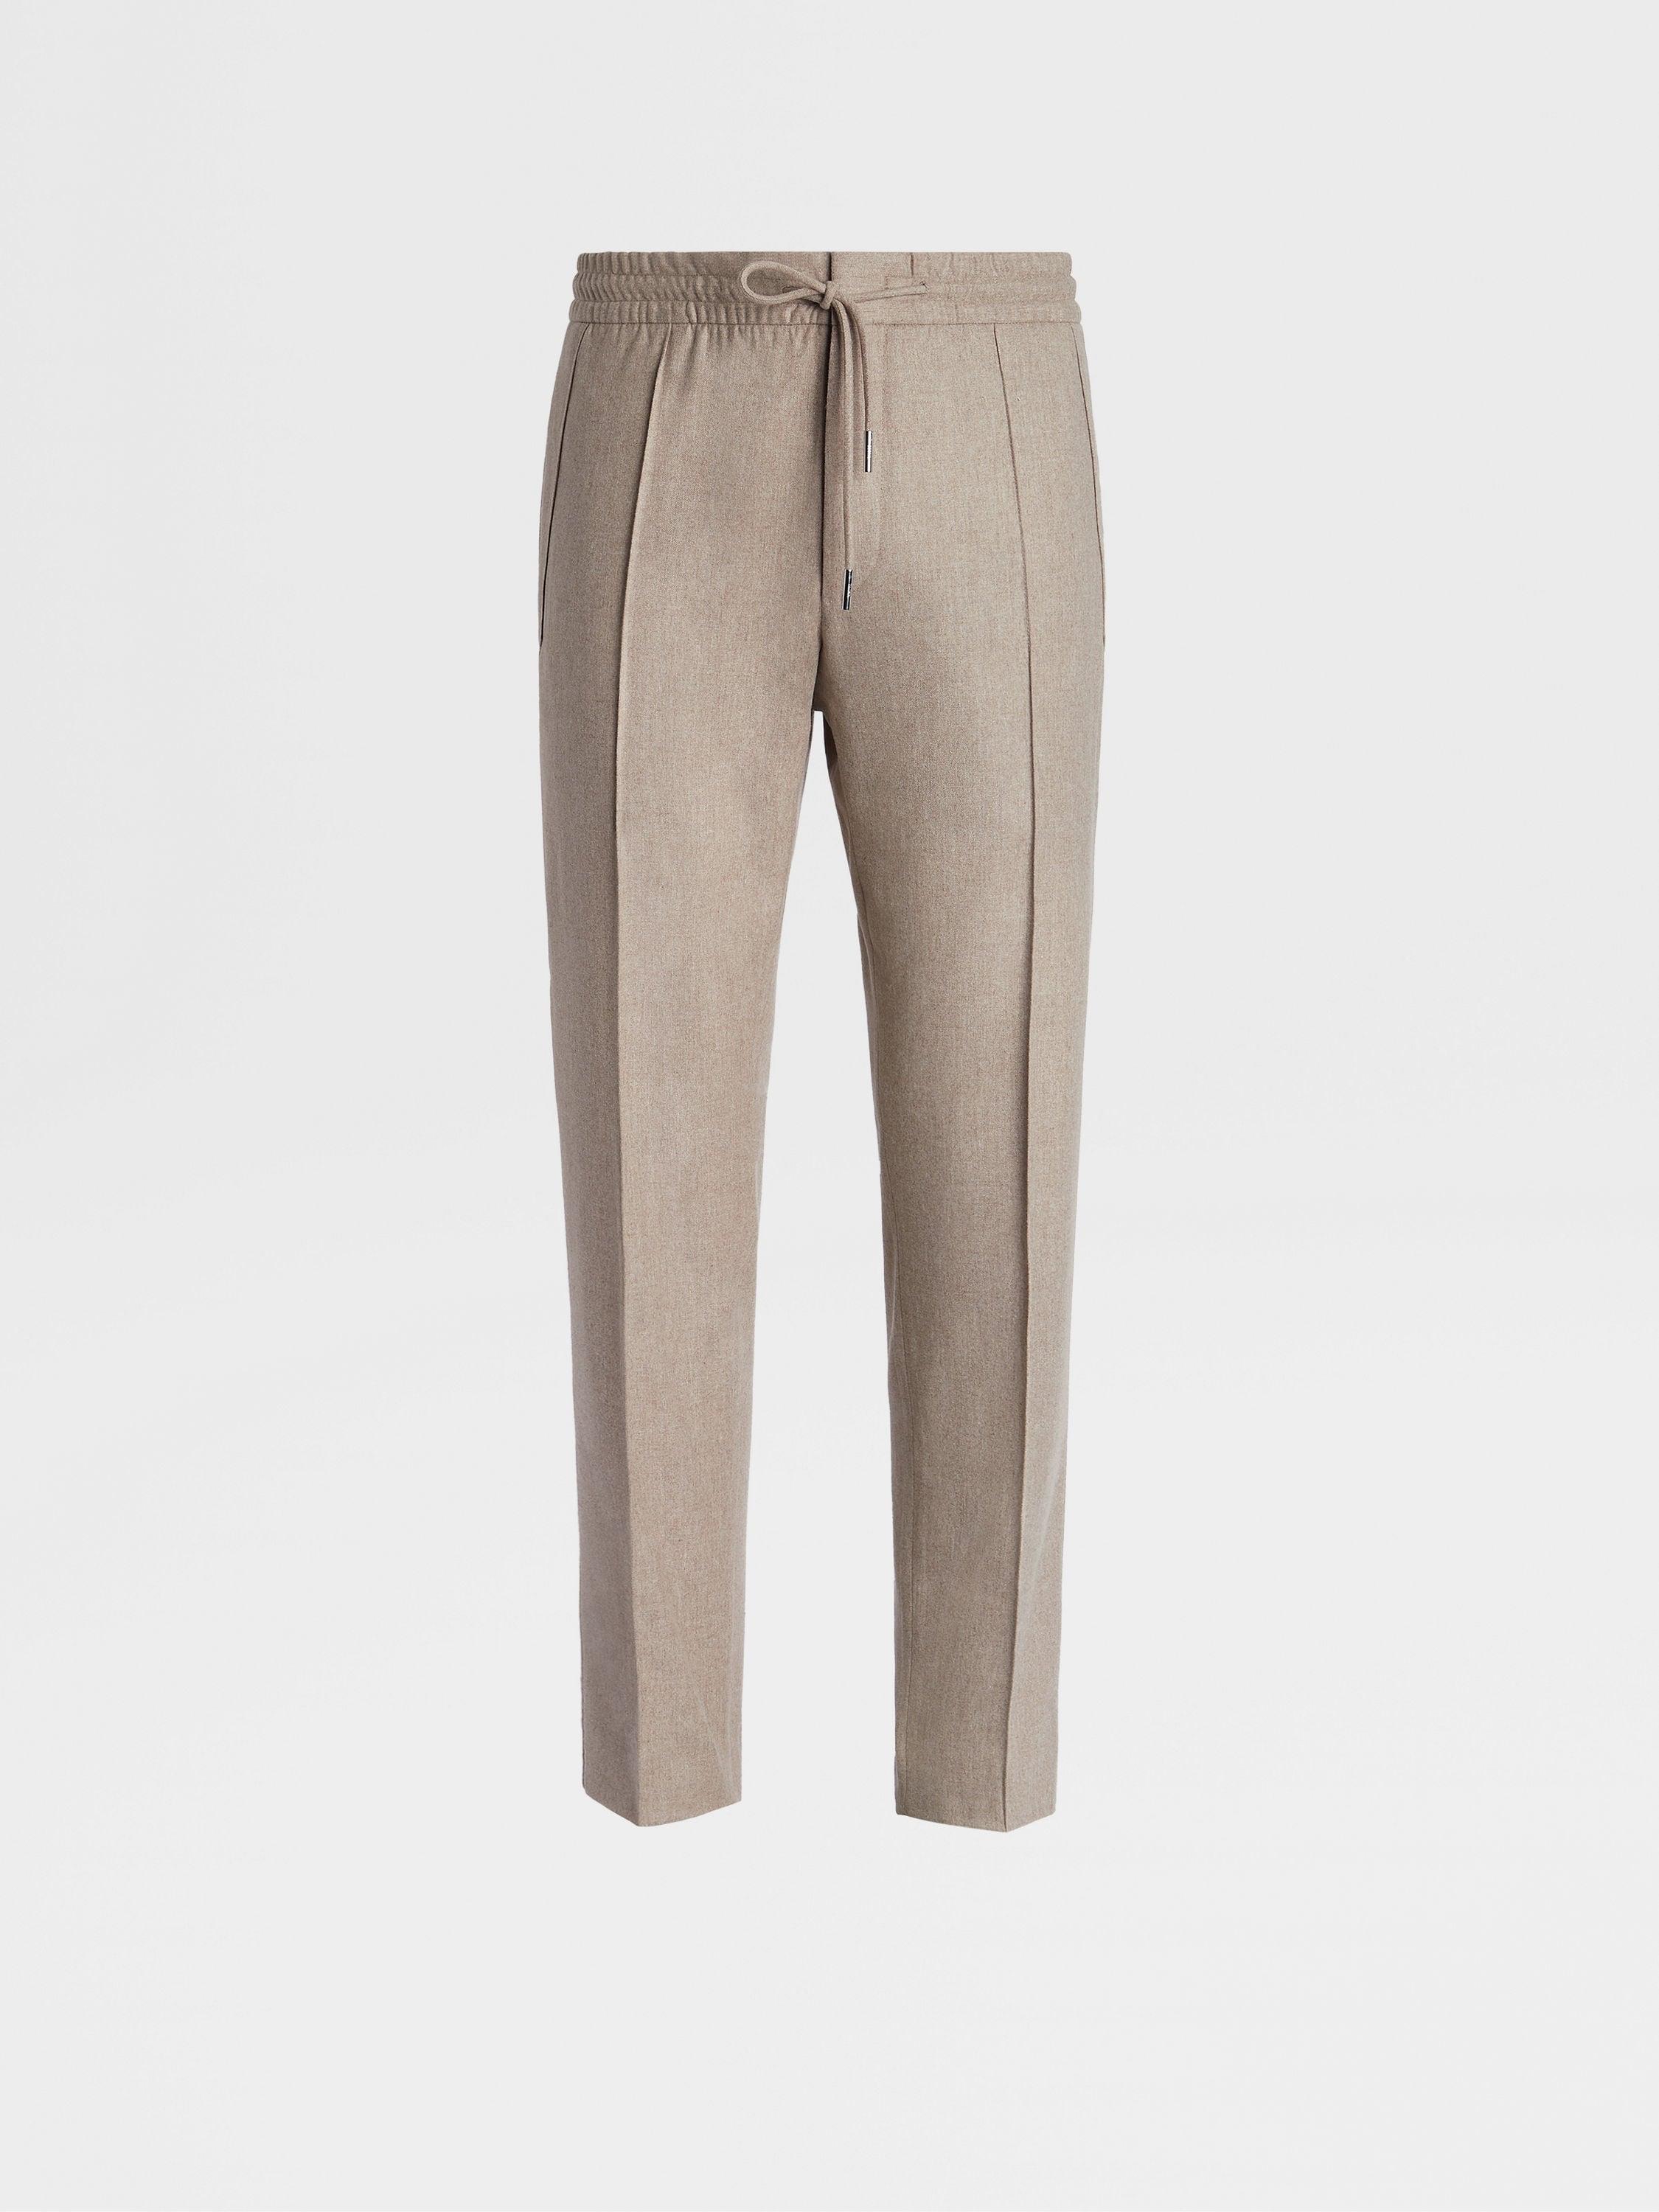 Light Taupe 14milmil14 Wool Blend Joggers LU 28046499 FW23 Zegna 